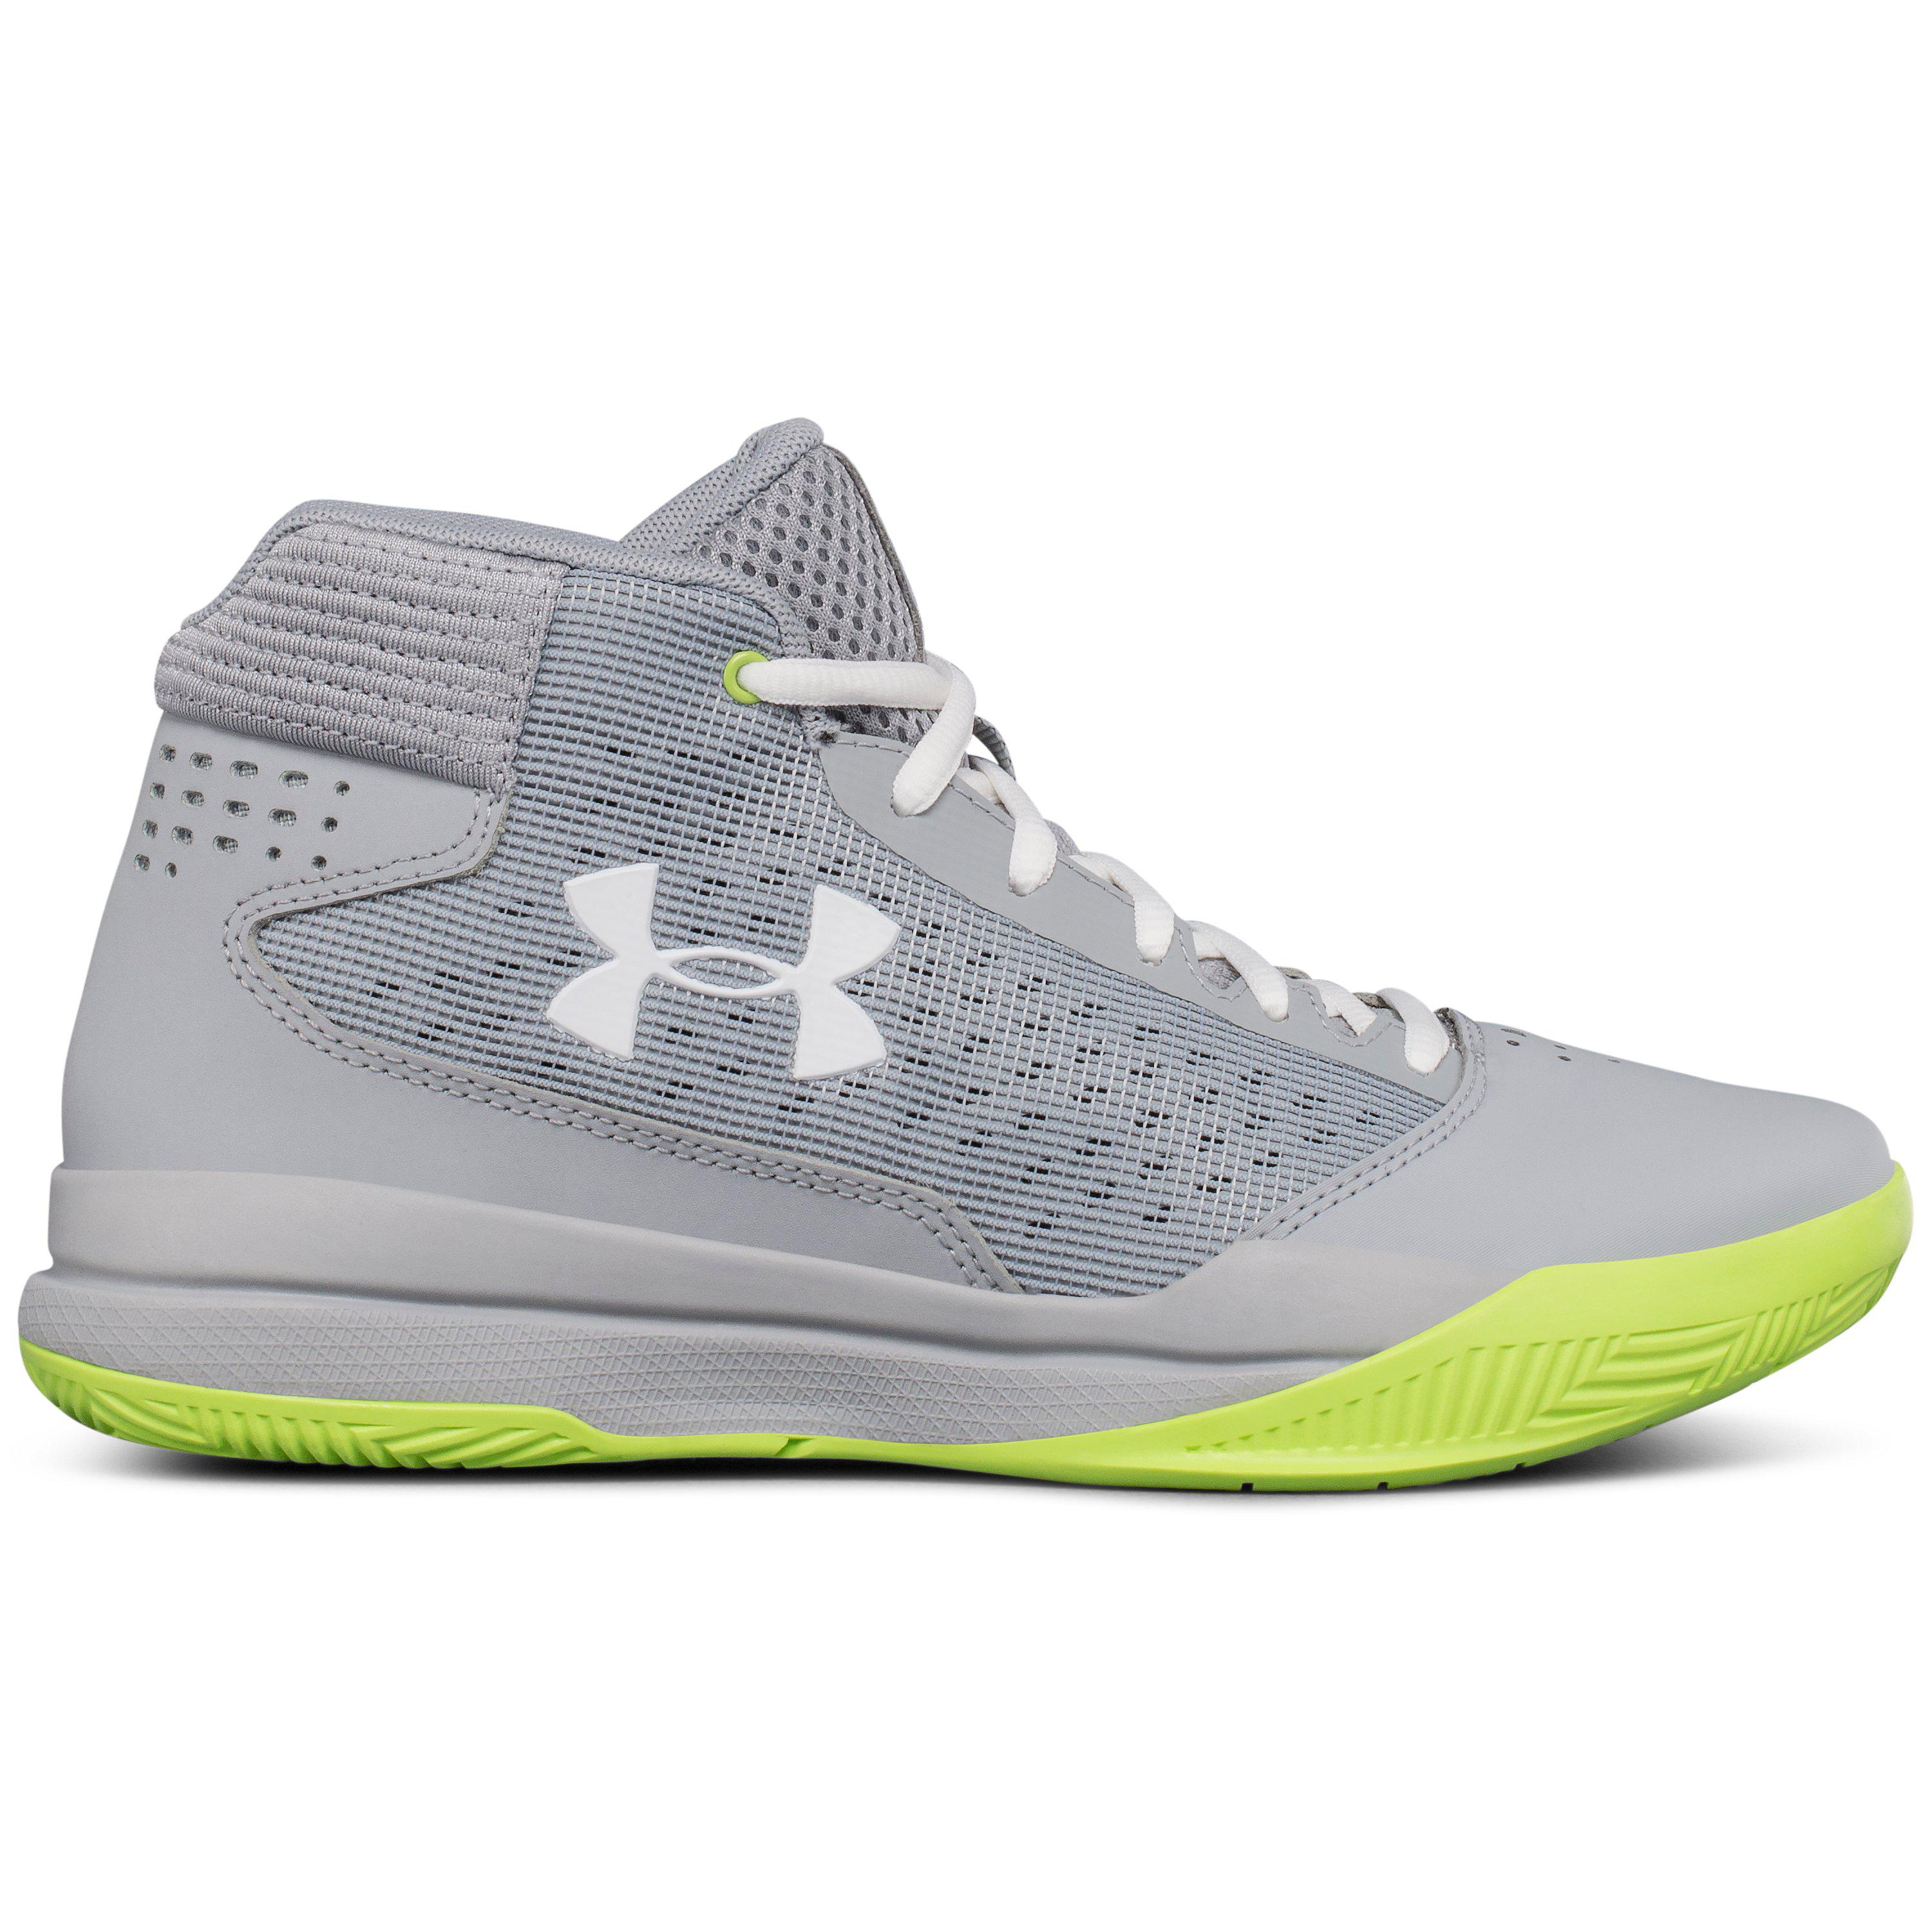 under armour women's jet 2017 basketball shoes